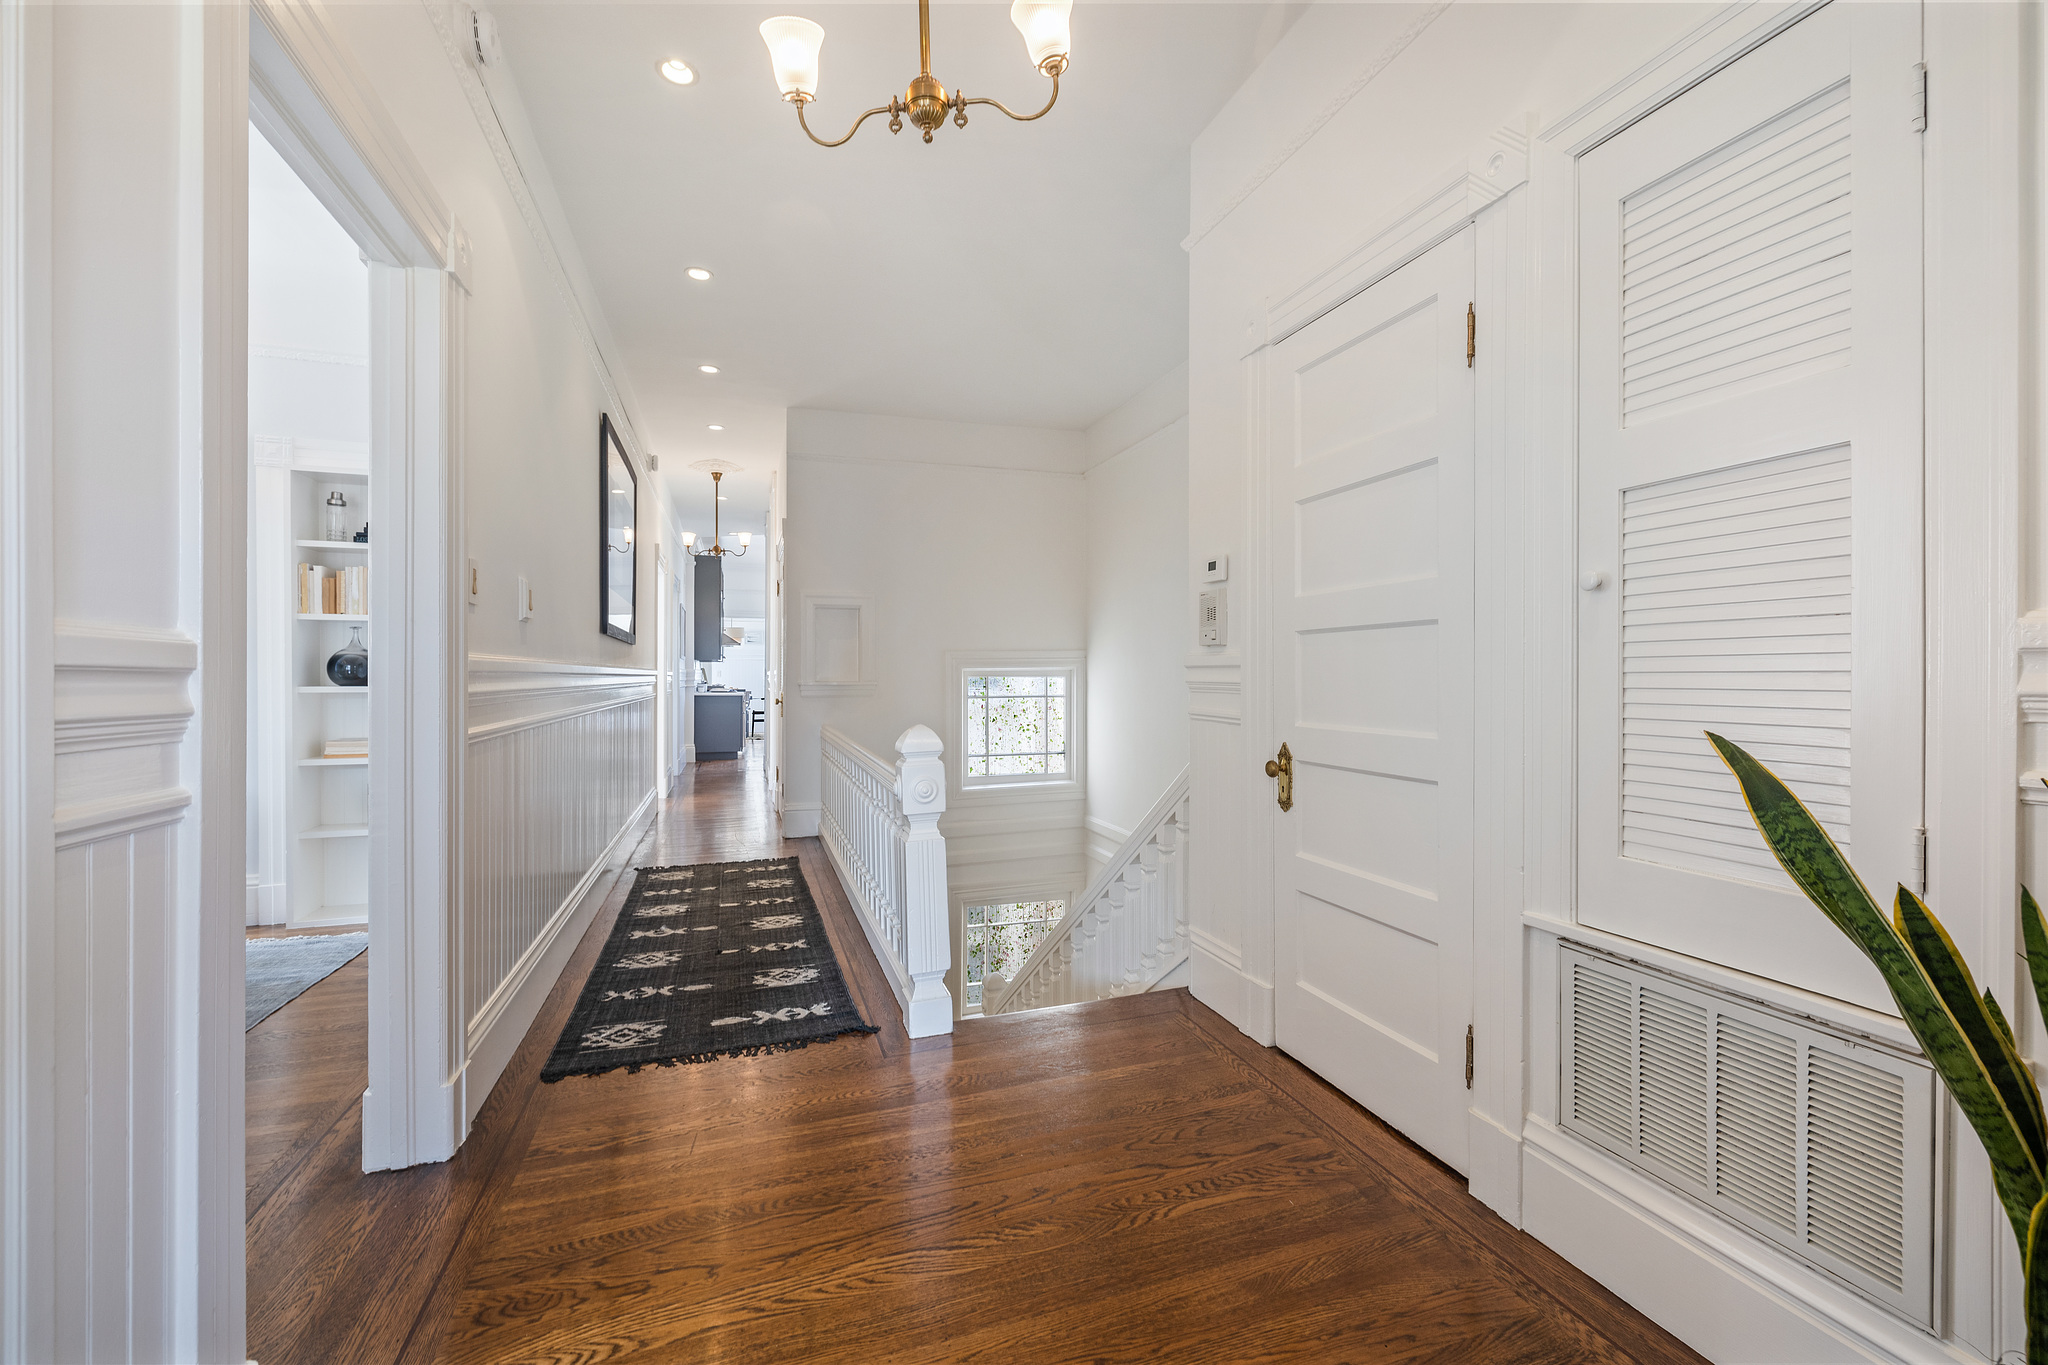 Property Photo: Hallway with wood floors and white walls